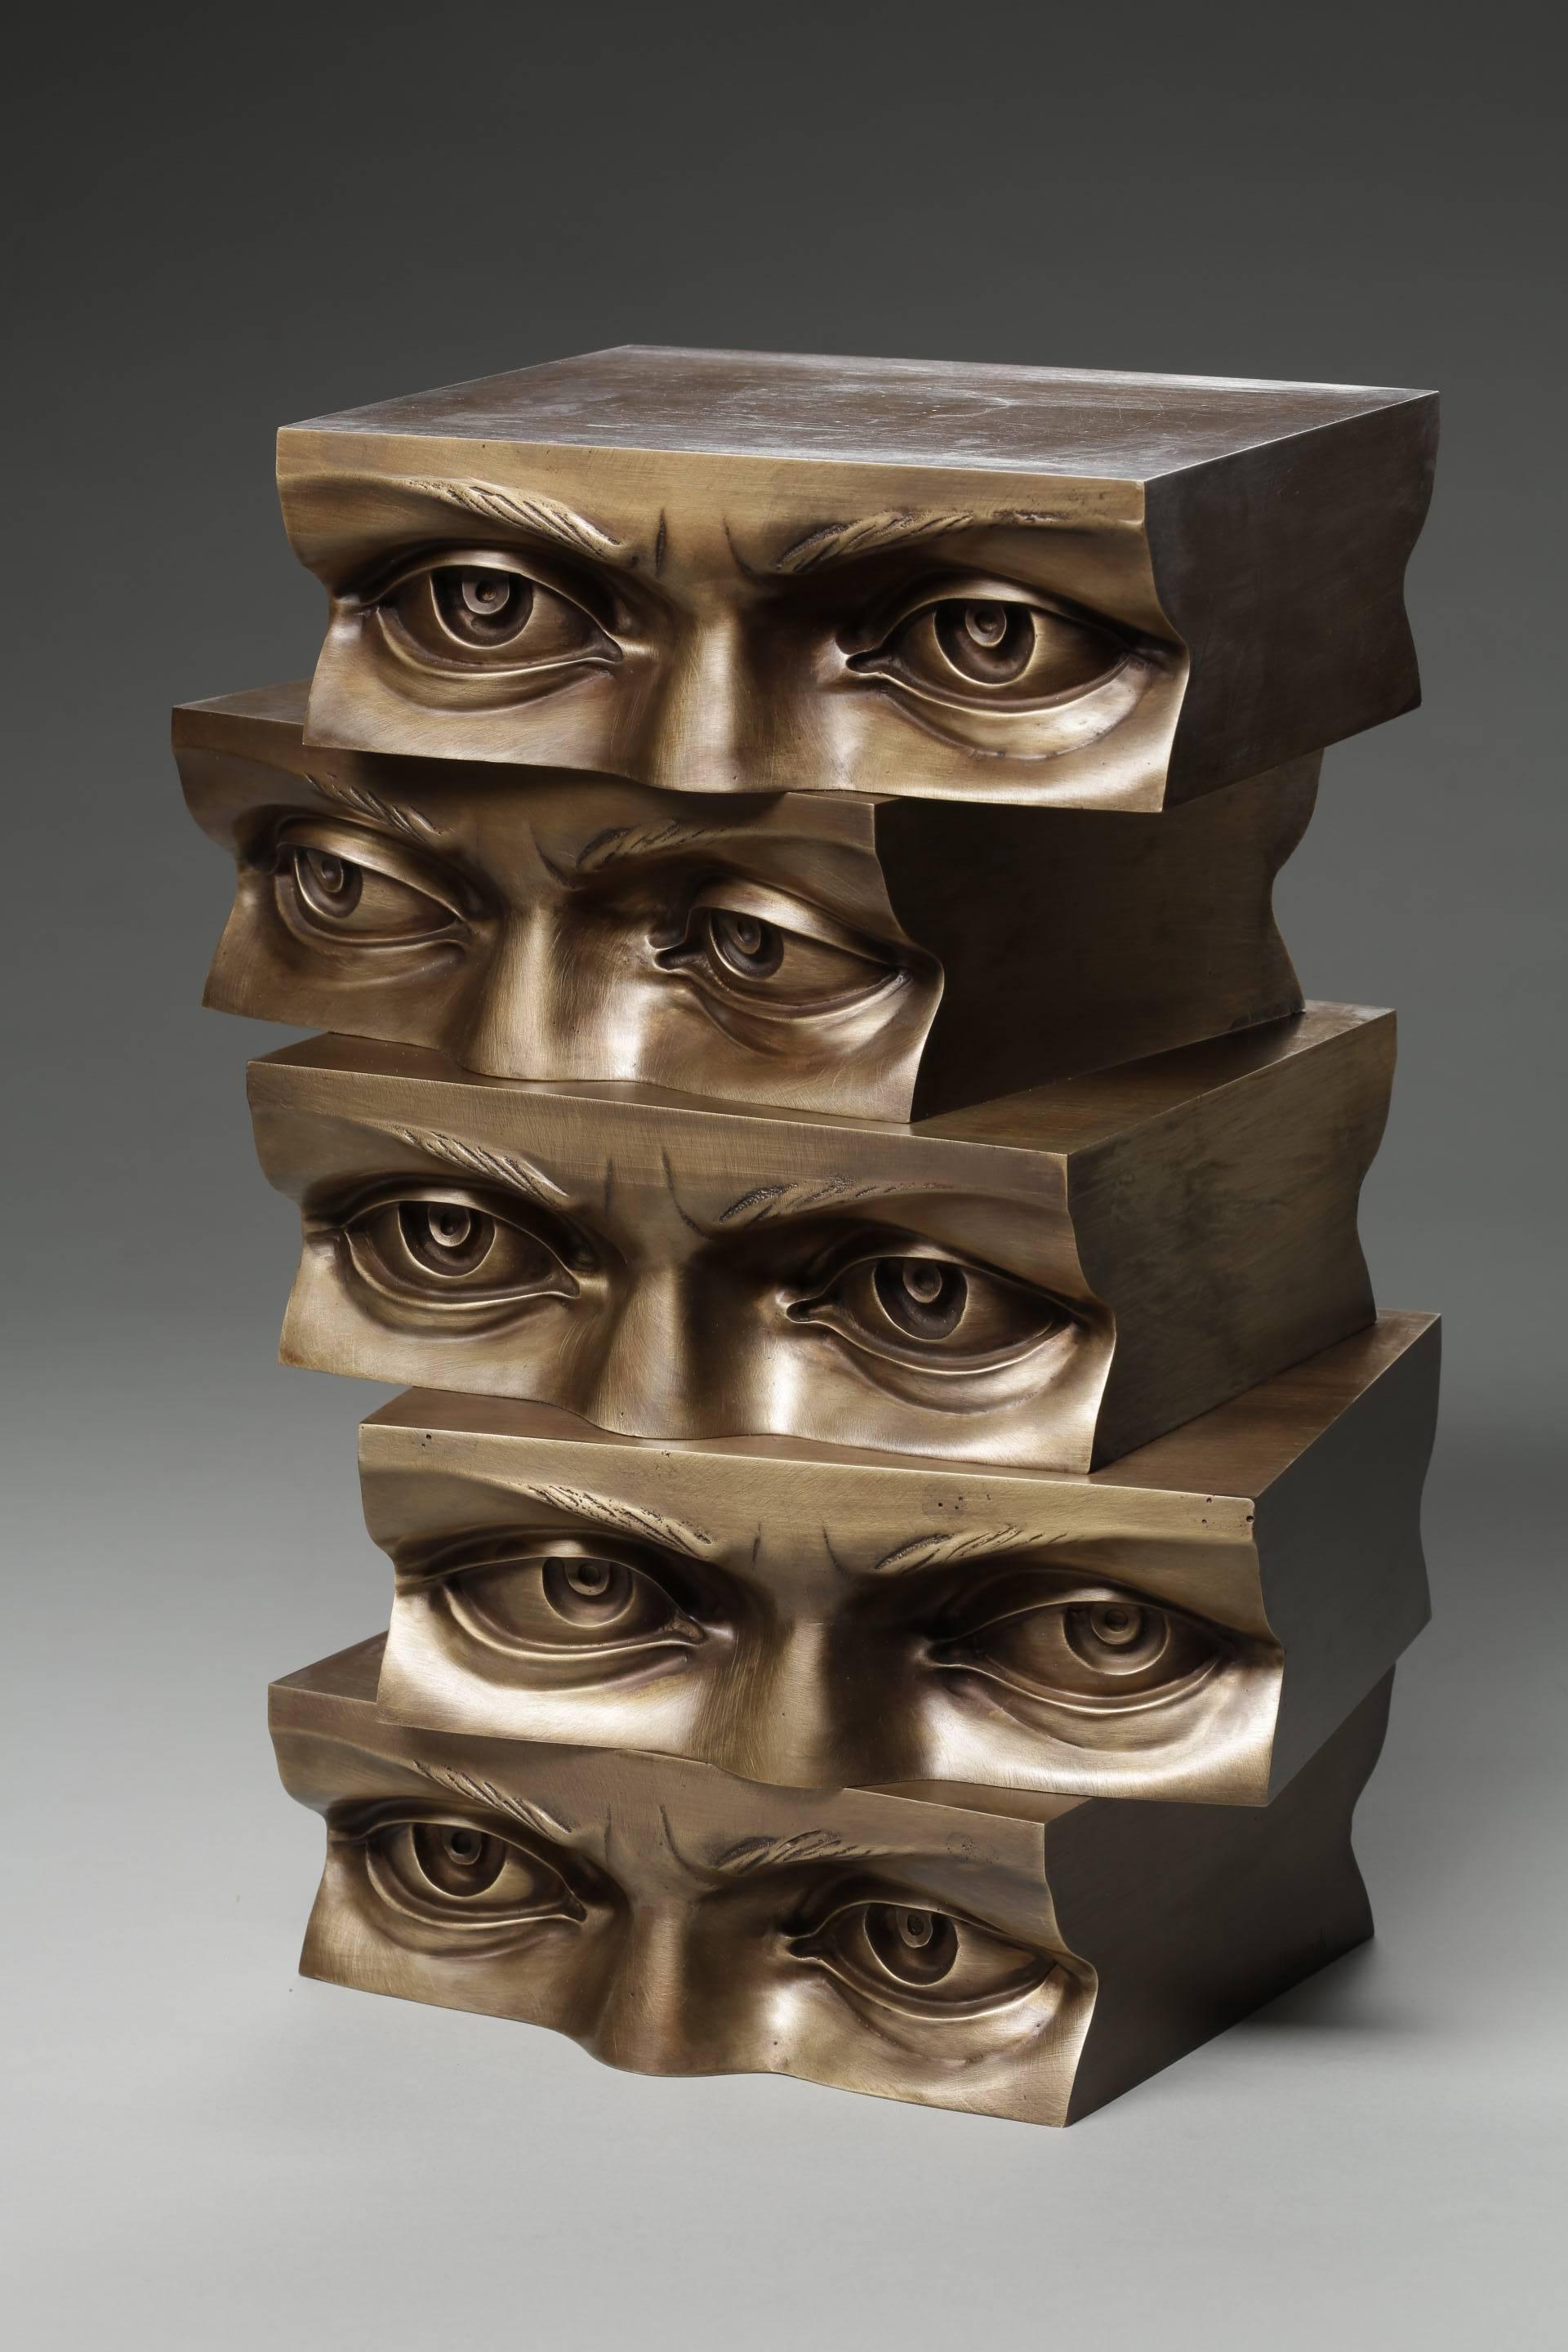 Big Brother - Surrealist Sculpture by Unknown